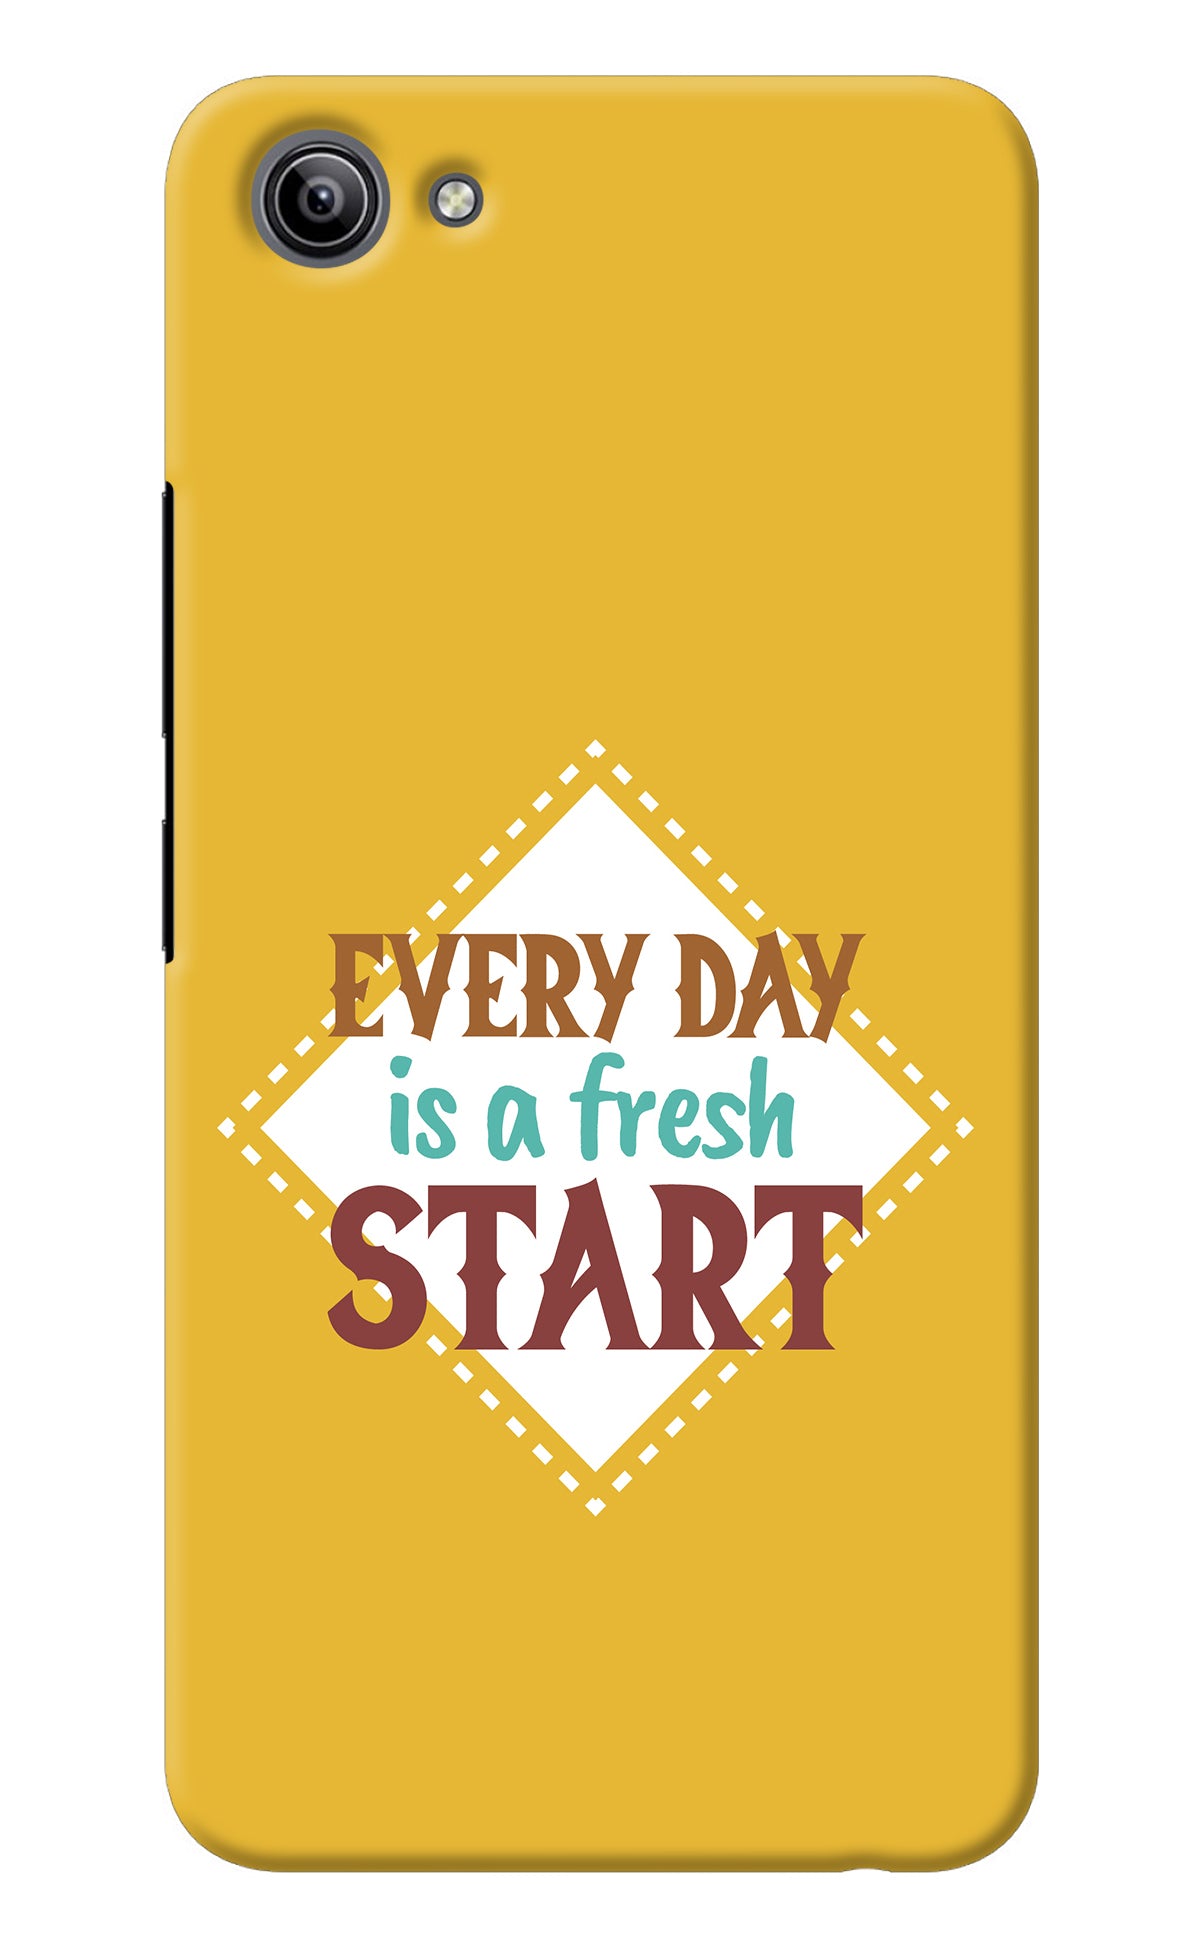 Every day is a Fresh Start Vivo Y81i Back Cover